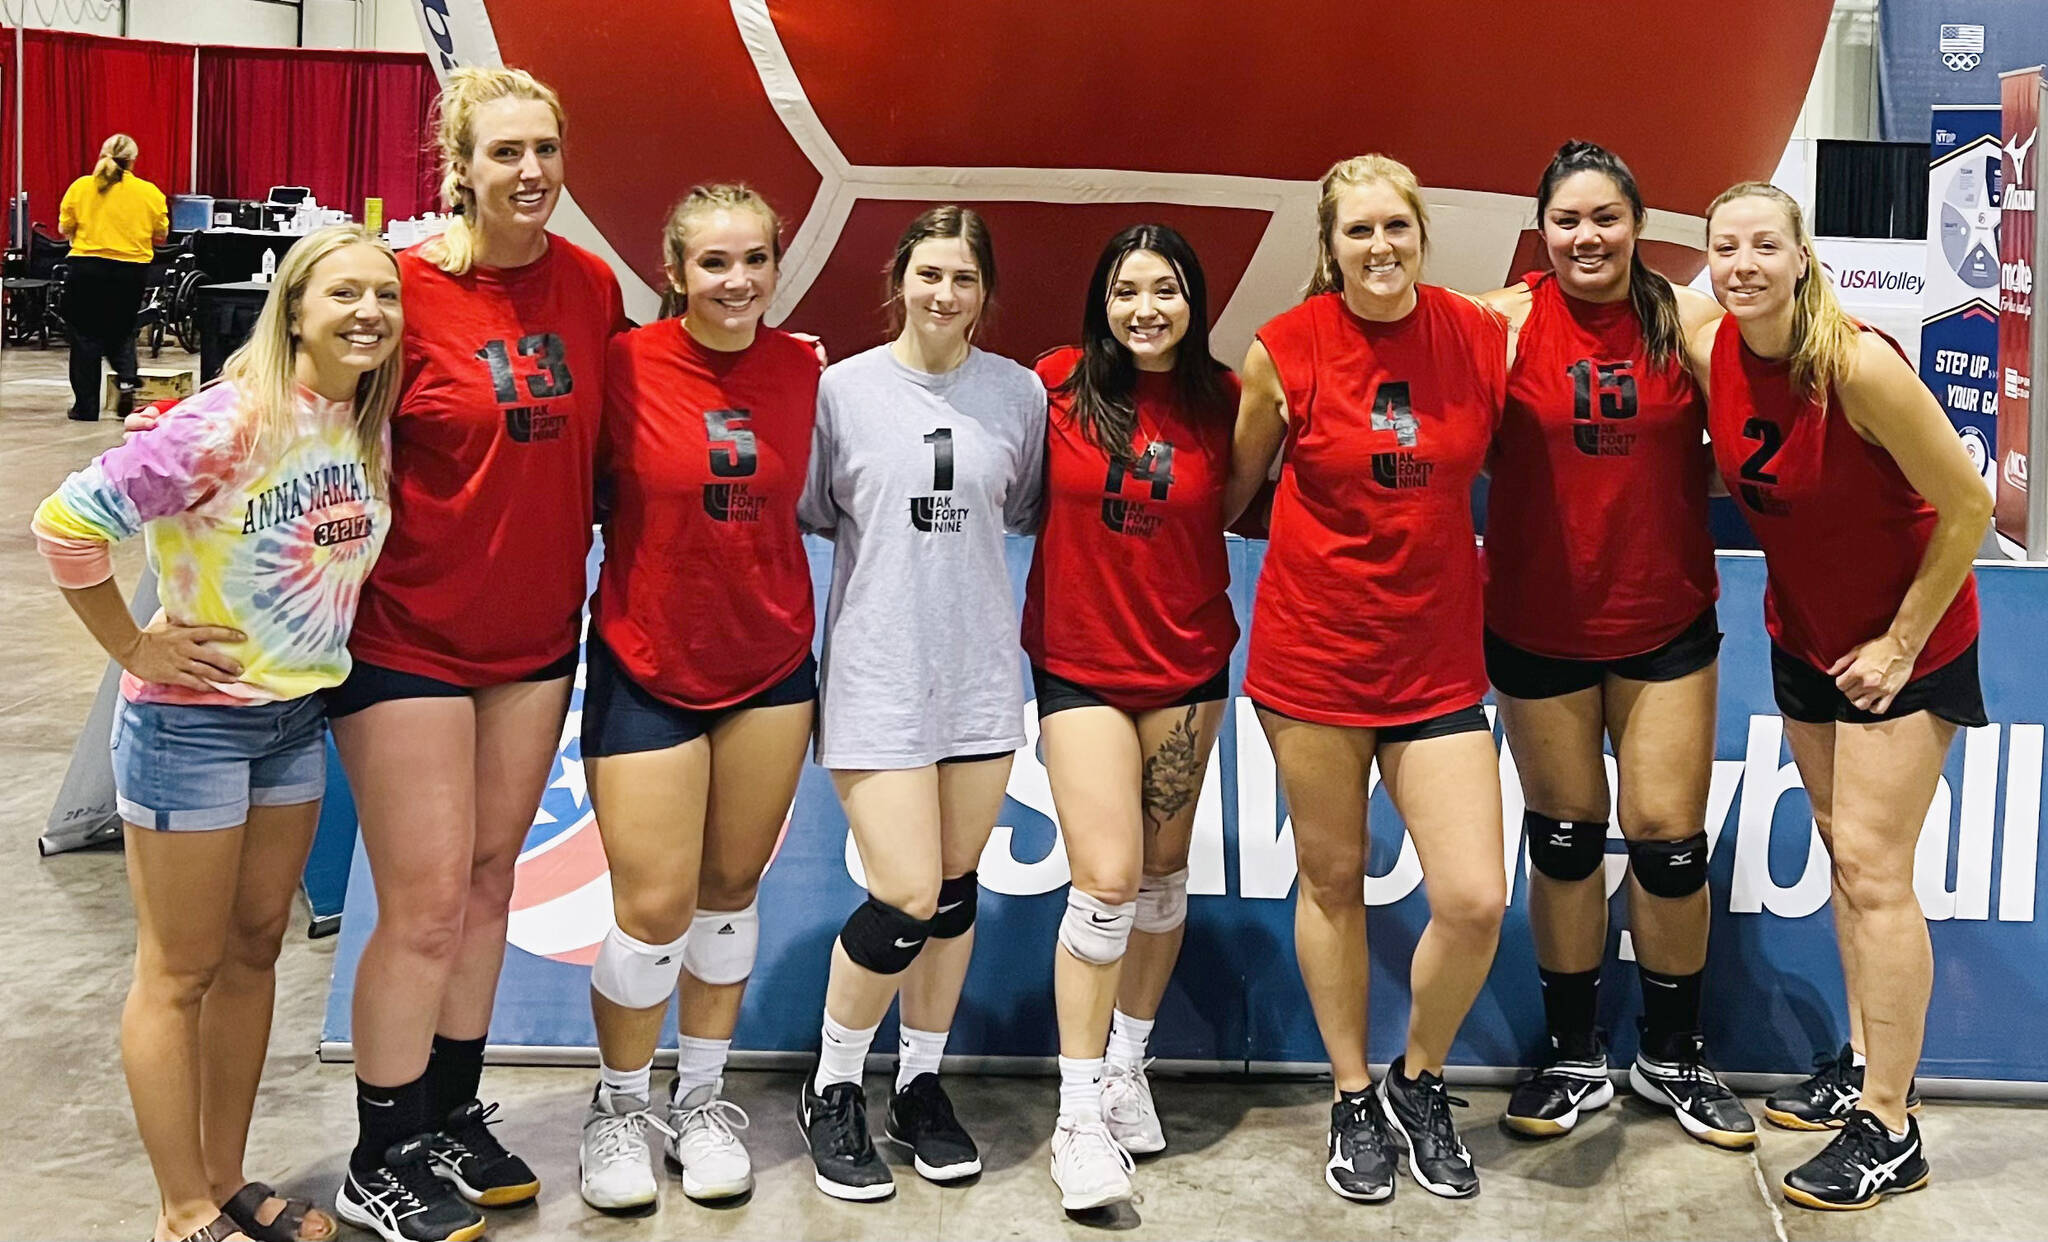 Members of the AK-49ers, Stacey Segura, Jordan Weber, Viannie Kazan, Kelsey Clark, Shaylynn Zener, Amanda McDowell, Maureen Sabado and Laura Roofe, pose at the 2022 USA Volleyball Open National Championship in Orlando, Florida. The event was held from May 27 to June 1. The AK-49ers placed 17th out of 35 teams in the Women's B Division and fifth in the bronze bracket. (Photo provided)